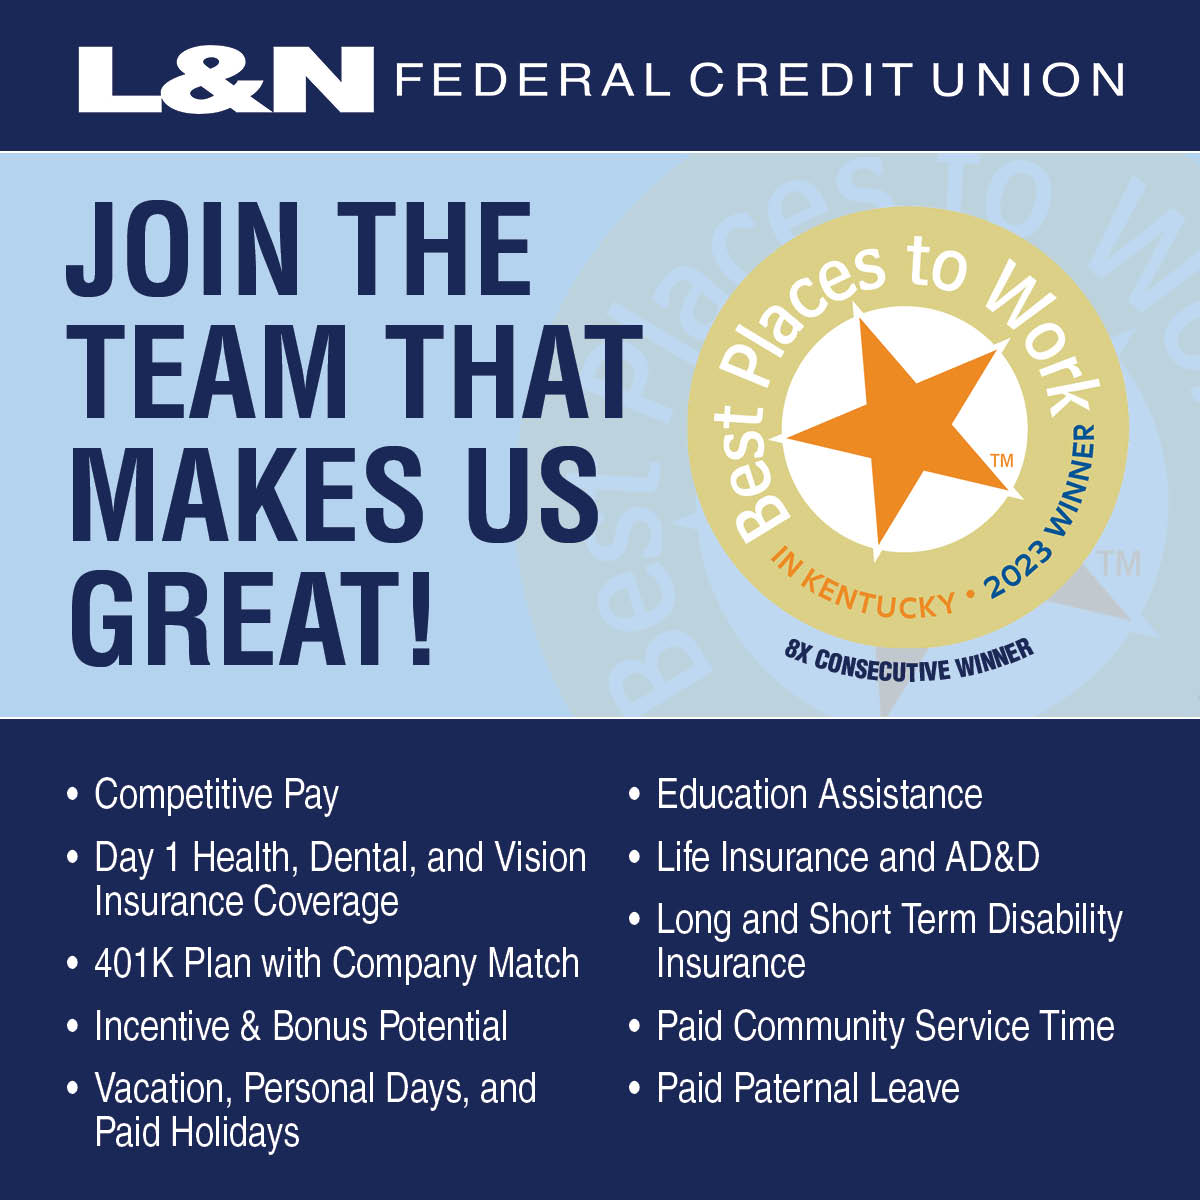 Exciting career opportunities await. Learn more at LNFCU.com/careers